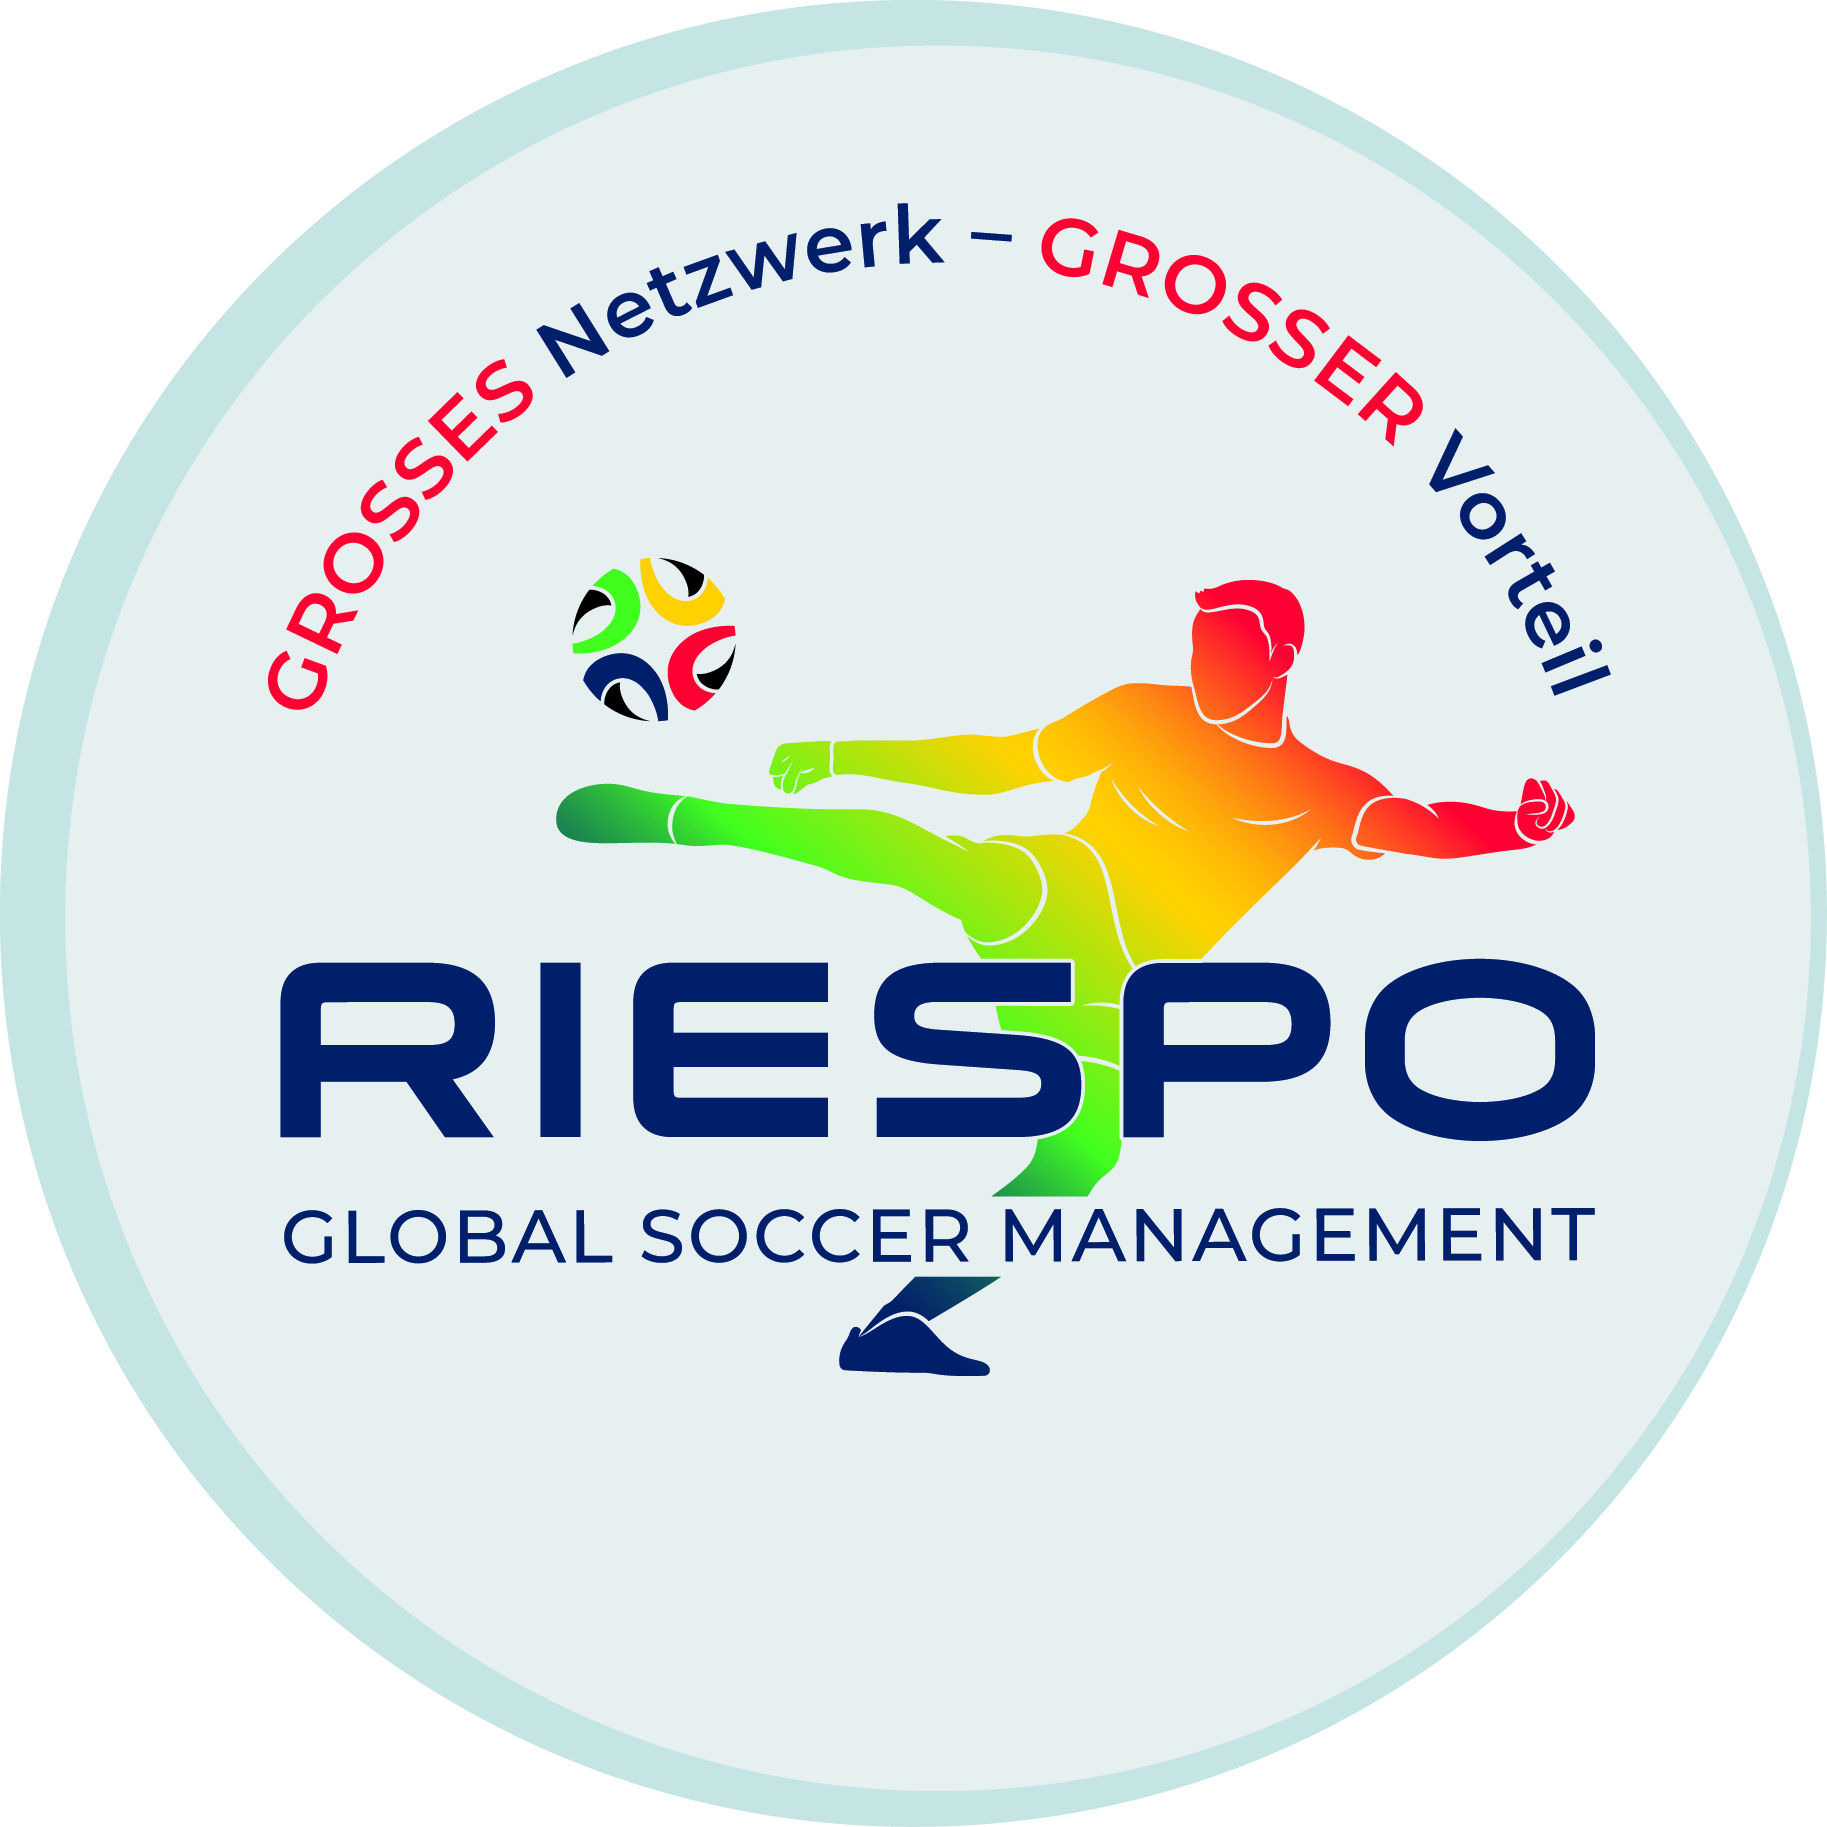 Exciting new digital development from Austria for the soccer transfer market